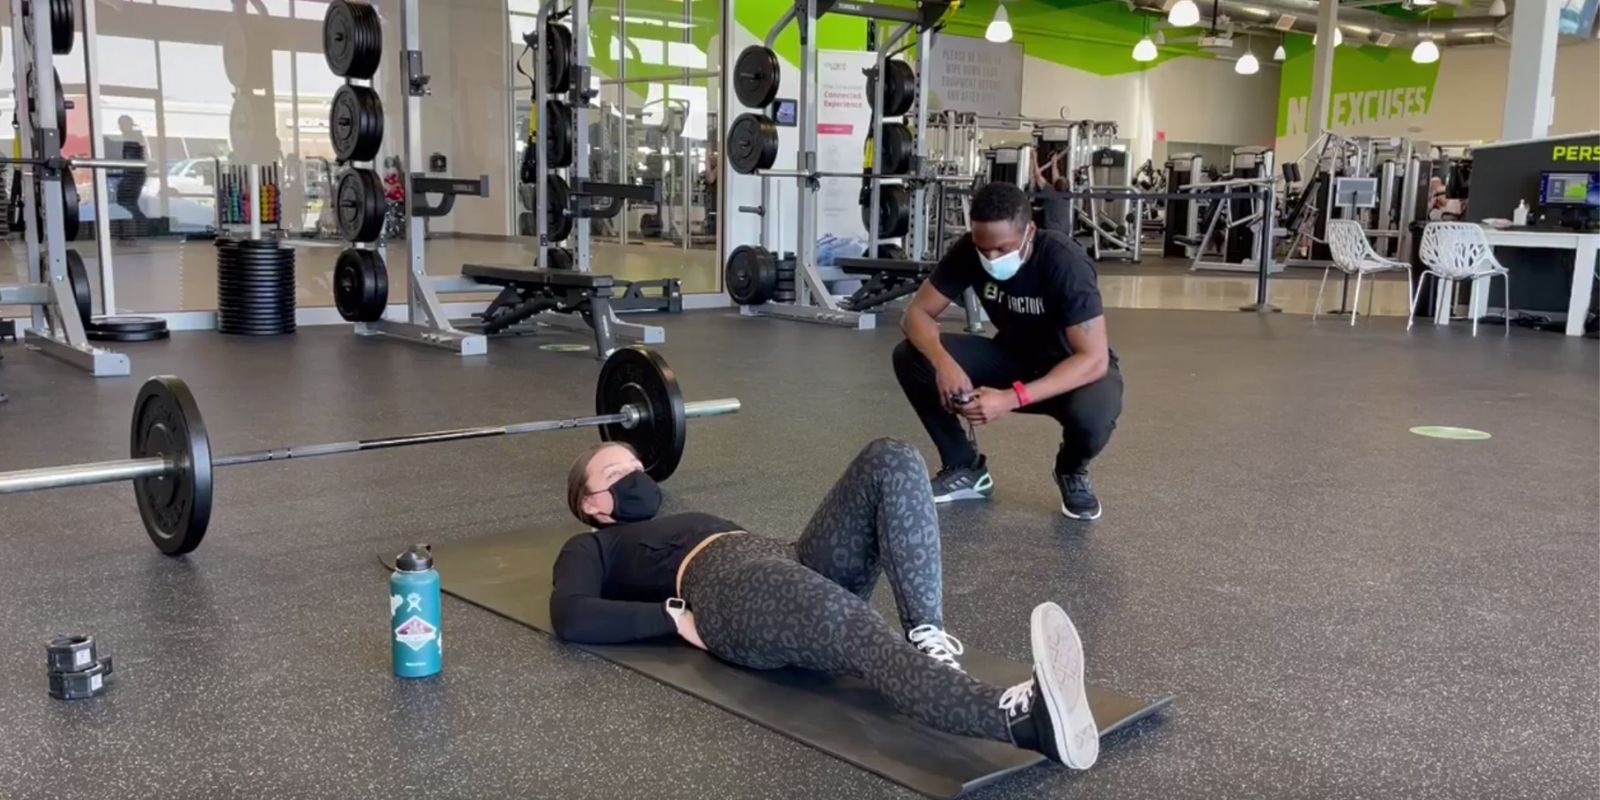 Gaining Strength With Personal Training: Ashlee N.'s Story